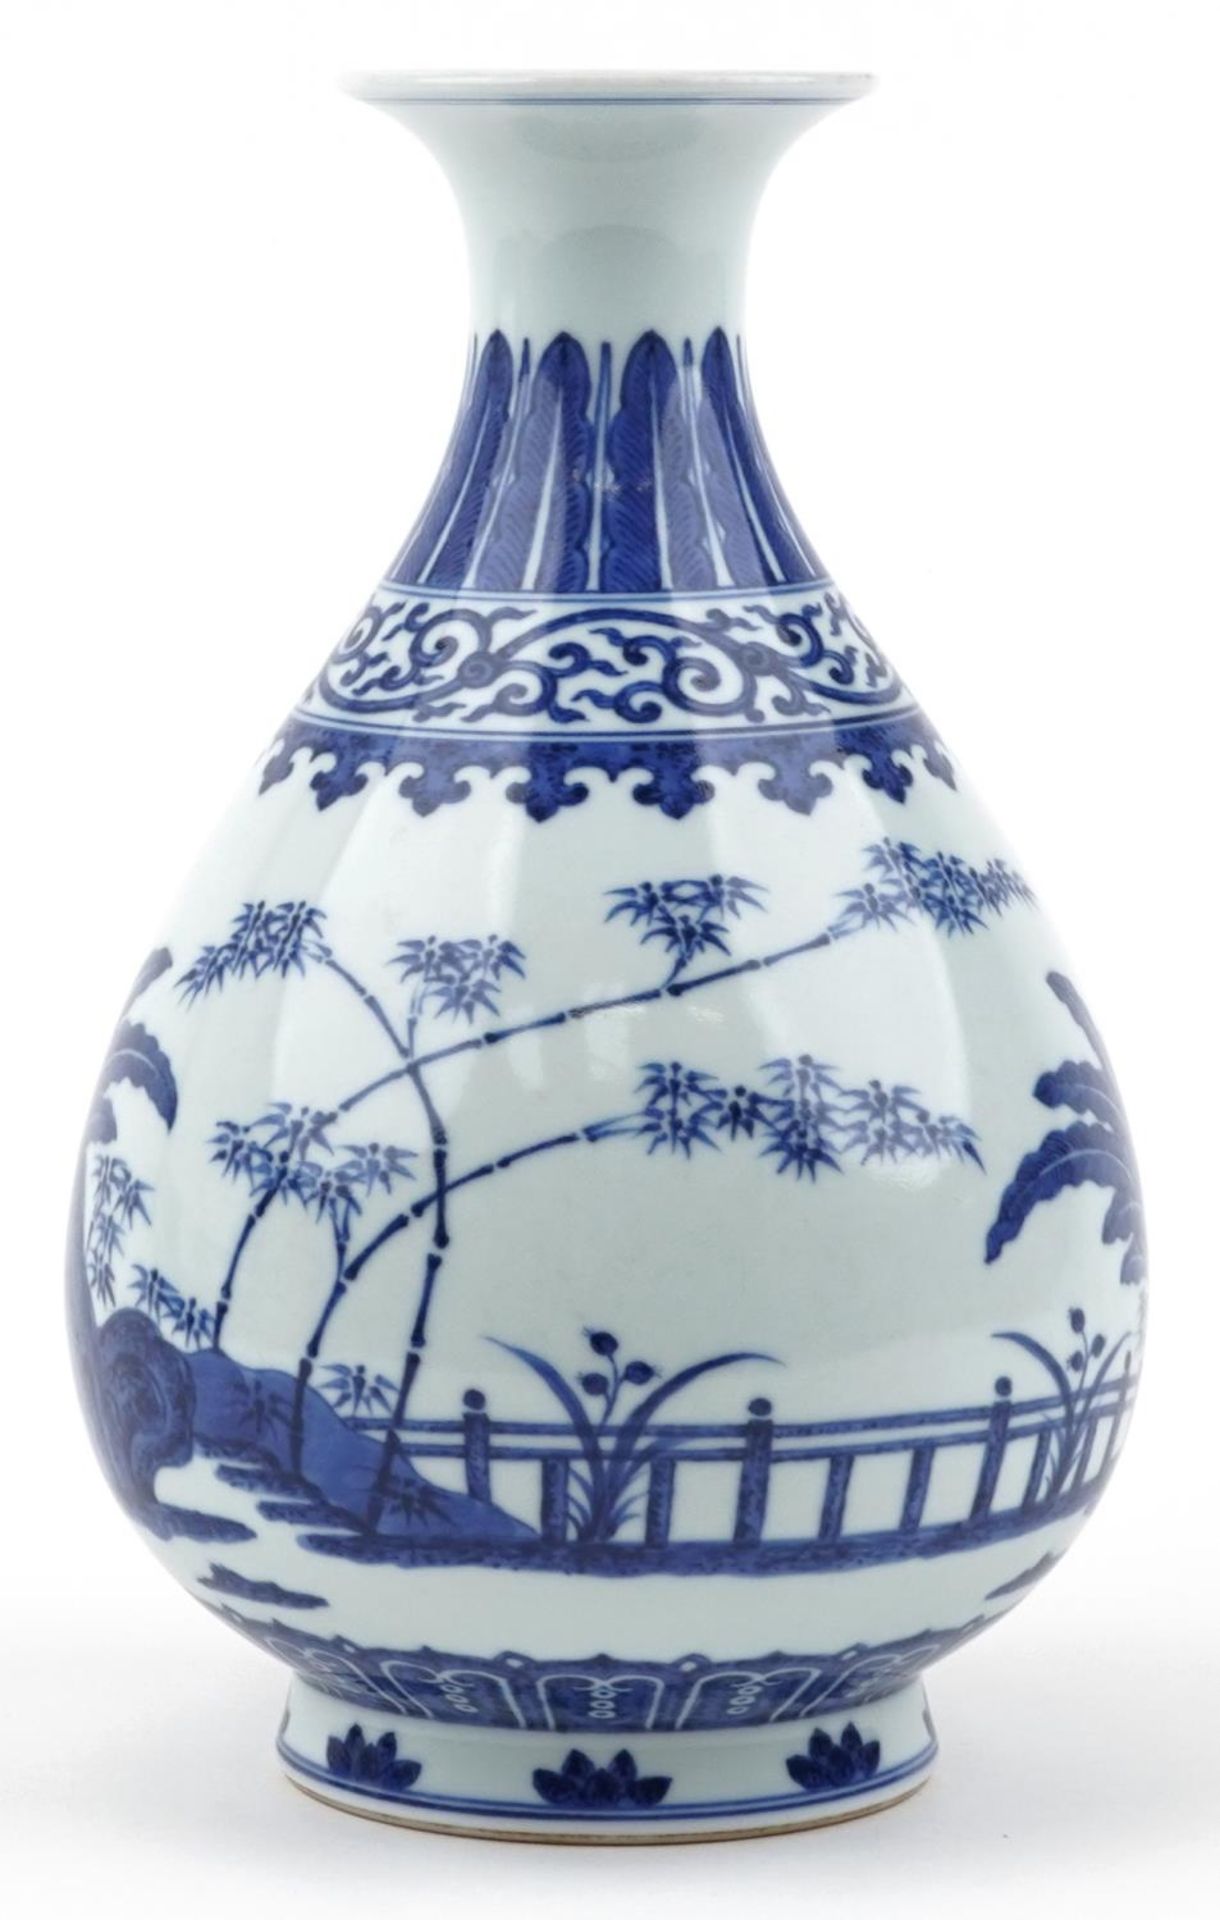 Chinese blue and white porcelain vase hand painted with a palace setting, six figure character marks - Image 4 of 6